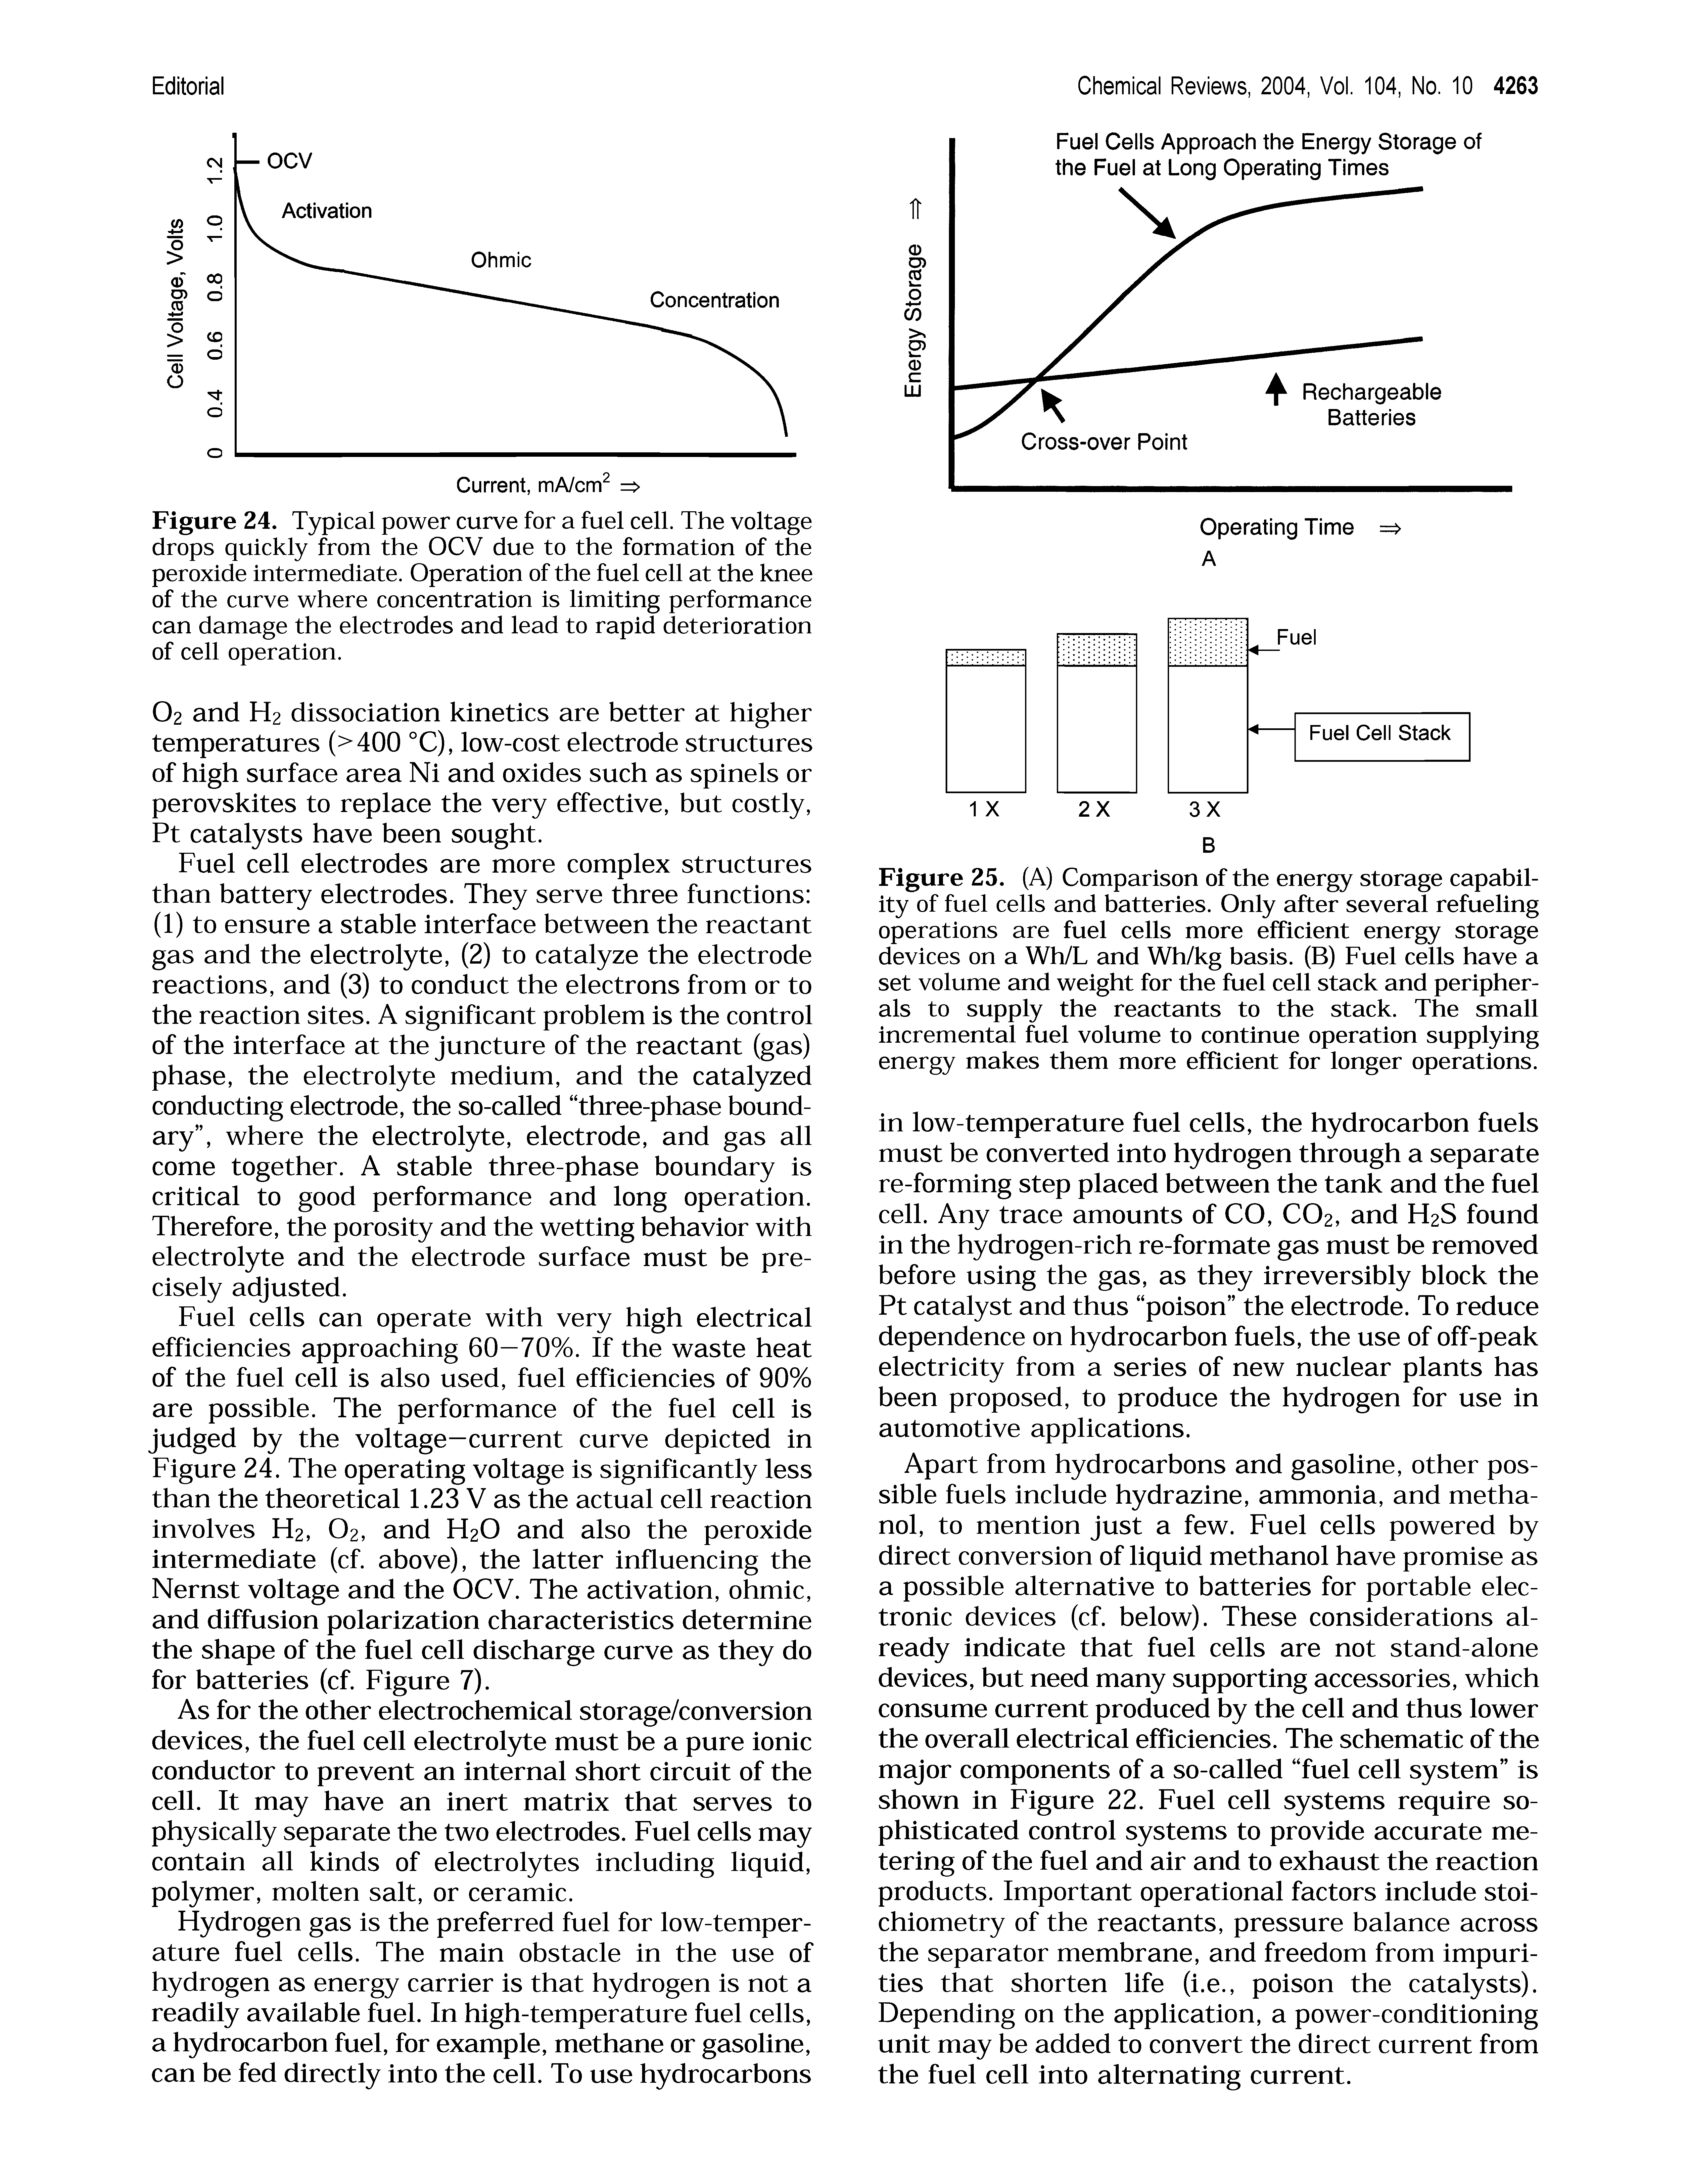 Figure 24. Typical power curve for a fuel cell. The voltage drops quickly from the OCV due to the formation of the peroxide intermediate. Operation of the fuel cell at the knee of the curve where concentration is limiting performance can damage the electrodes and lead to rapid deterioration of cell operation.